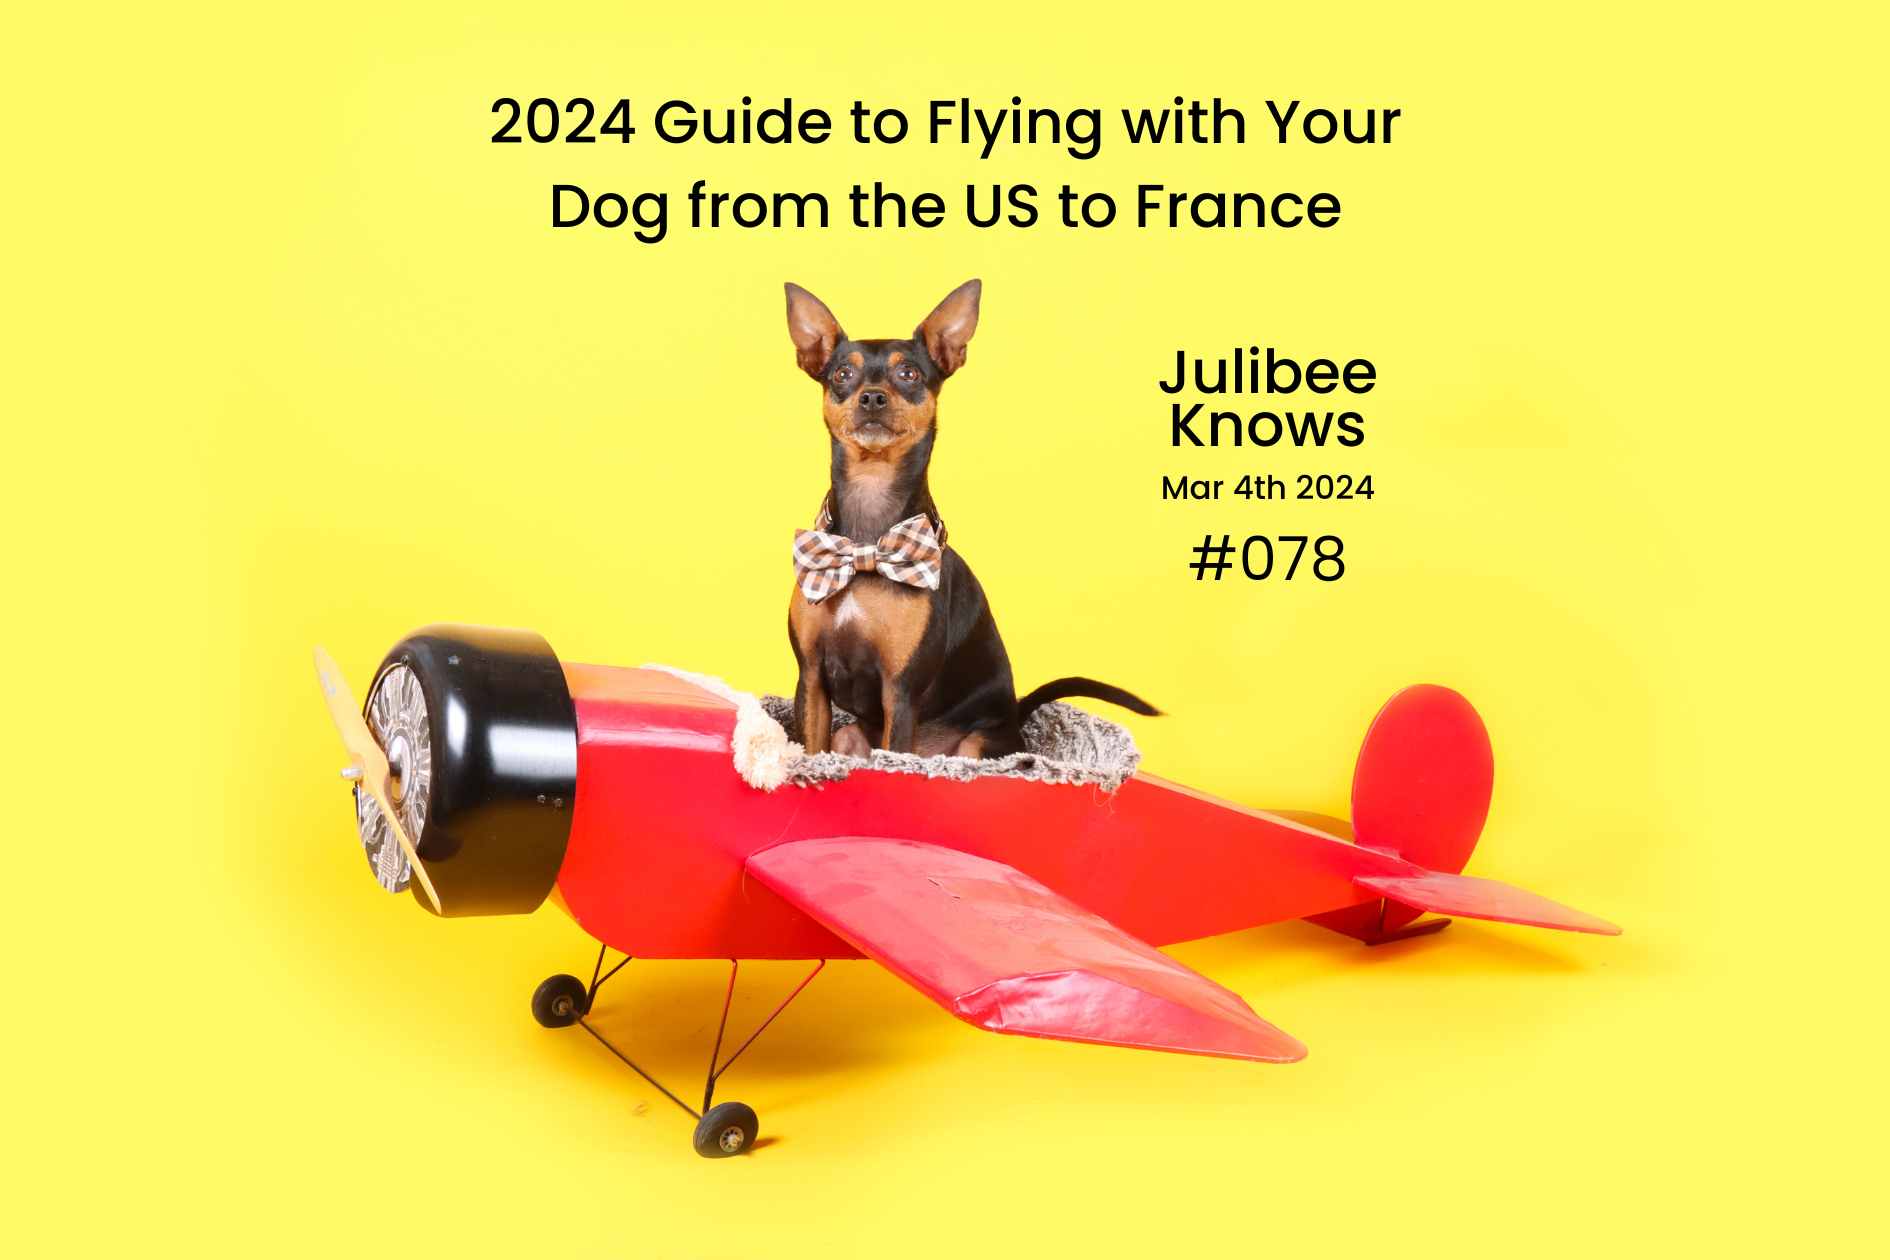 2024 Guide to Flying with Your Dog from the US to France